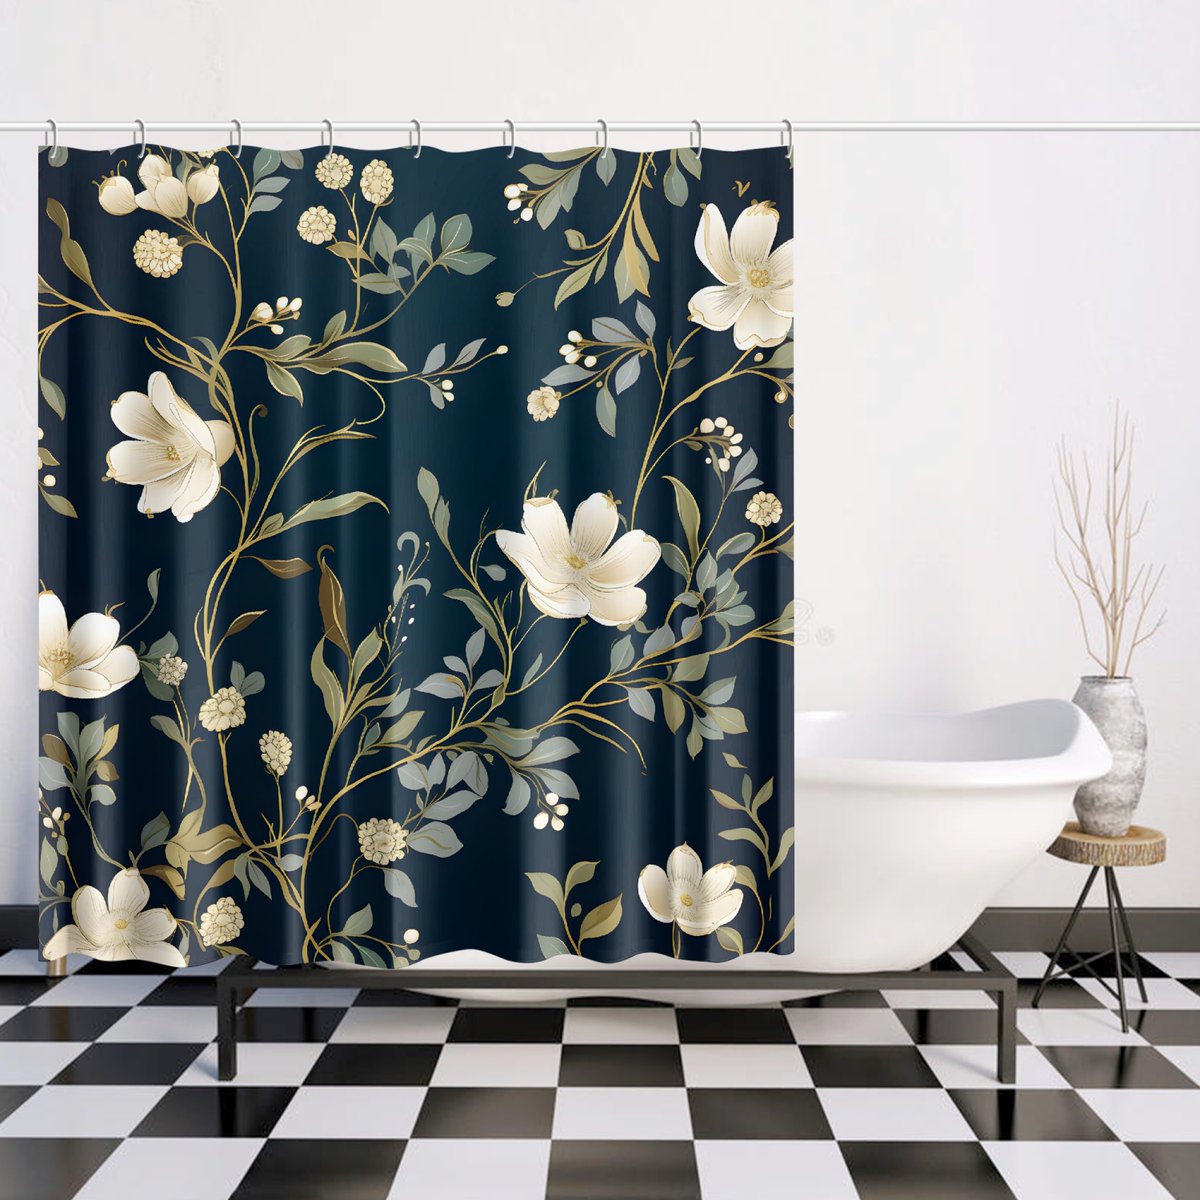 Make a splash with our vibrant and eye-catching shower curtain choices.
Available only at: i.mtr.cool/uwjmygocpj 
#showercurtain #showercutains #sale #unique #bathdecor #homedecor #moderndecor #boho #gift #housewarming #homeinspo #showerdesign #quality